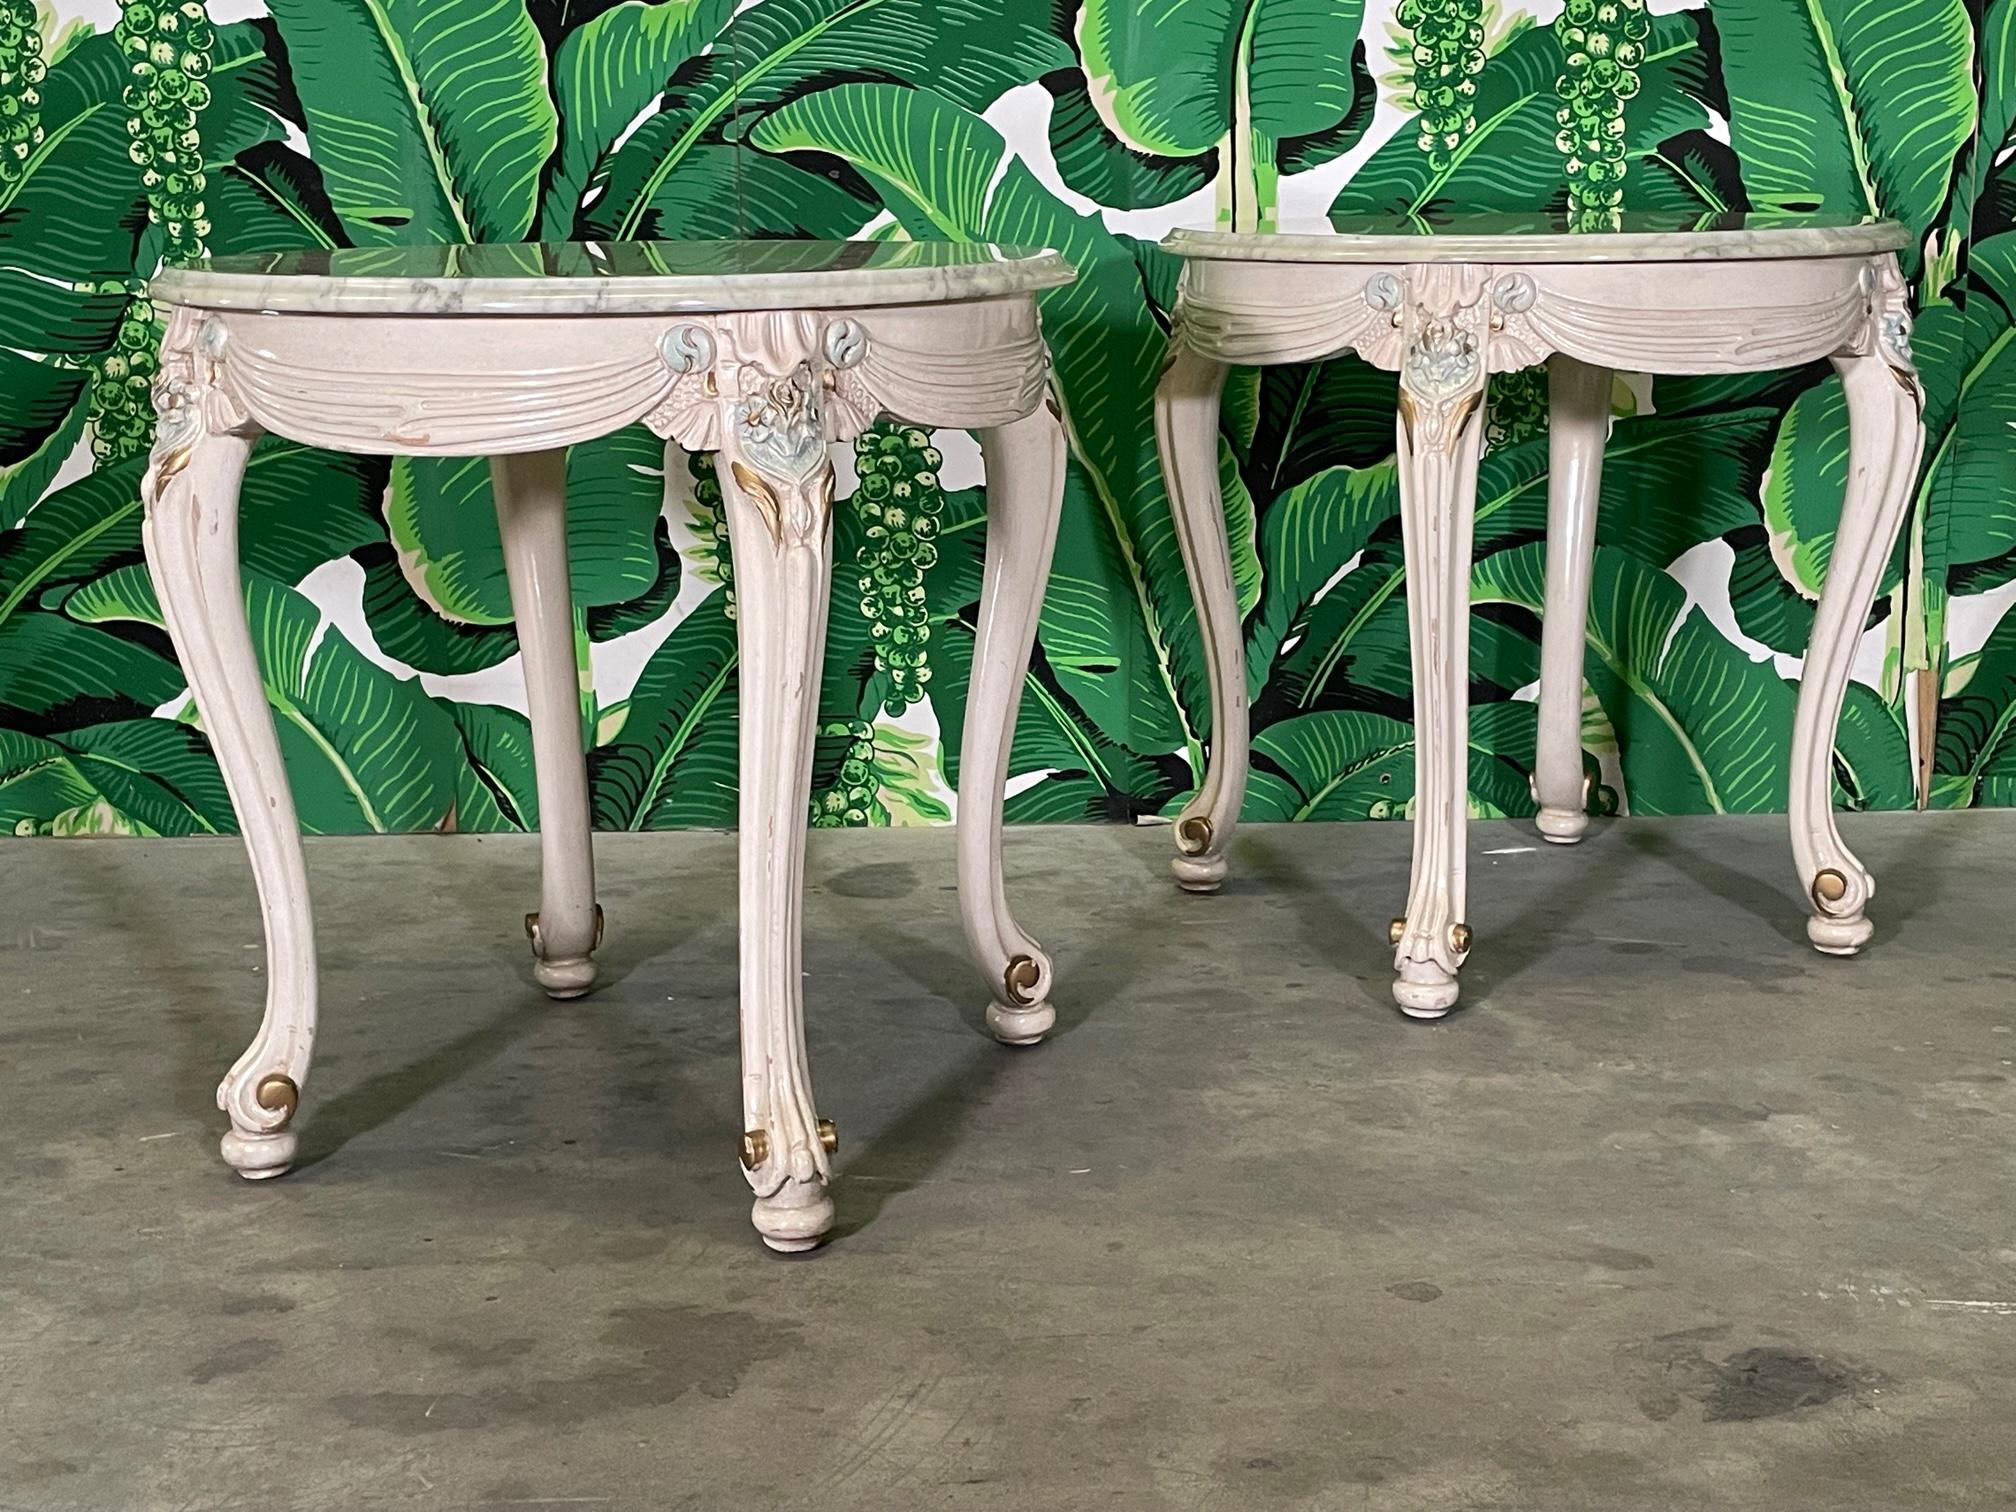 Pair of mid century Neoclassical style side tables feature a marble top and cabriole legs. Hand carved detailing in a draped fabric motif with hand painted accents. Good condition with minor imperfections consistent with age. May exhibit scuffs,